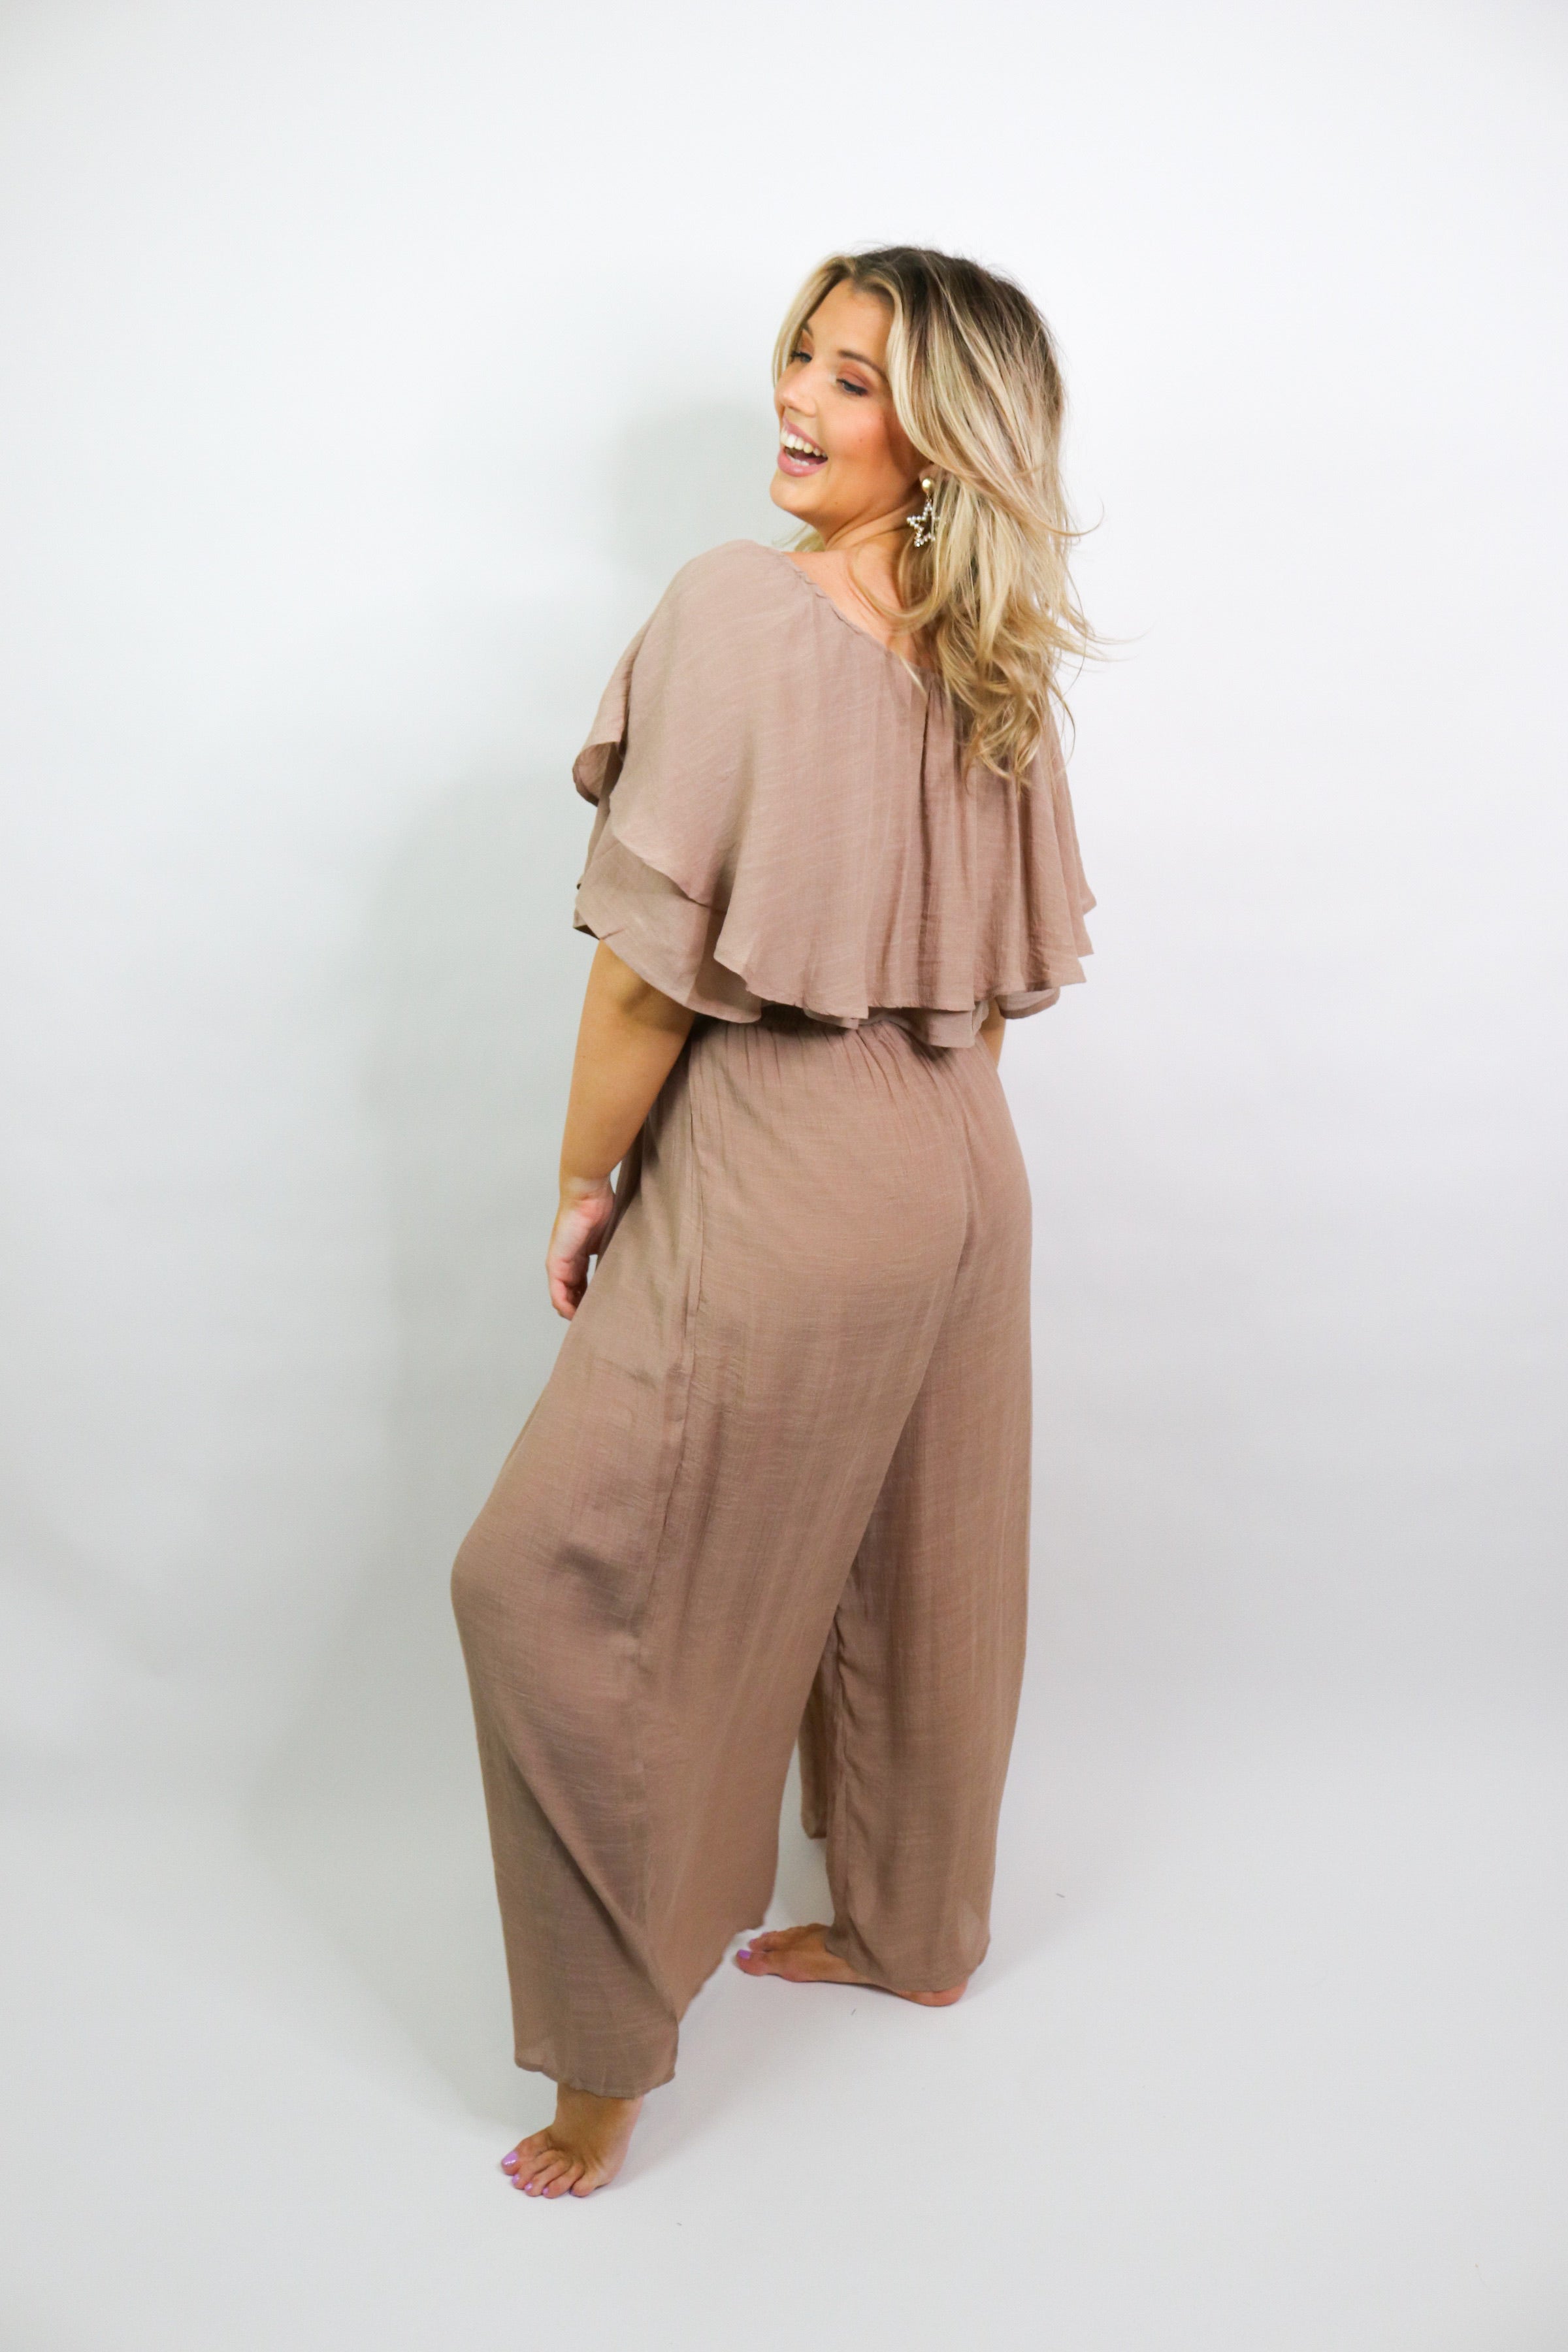 Sailing To Sunset - Taupe Two Piece Set